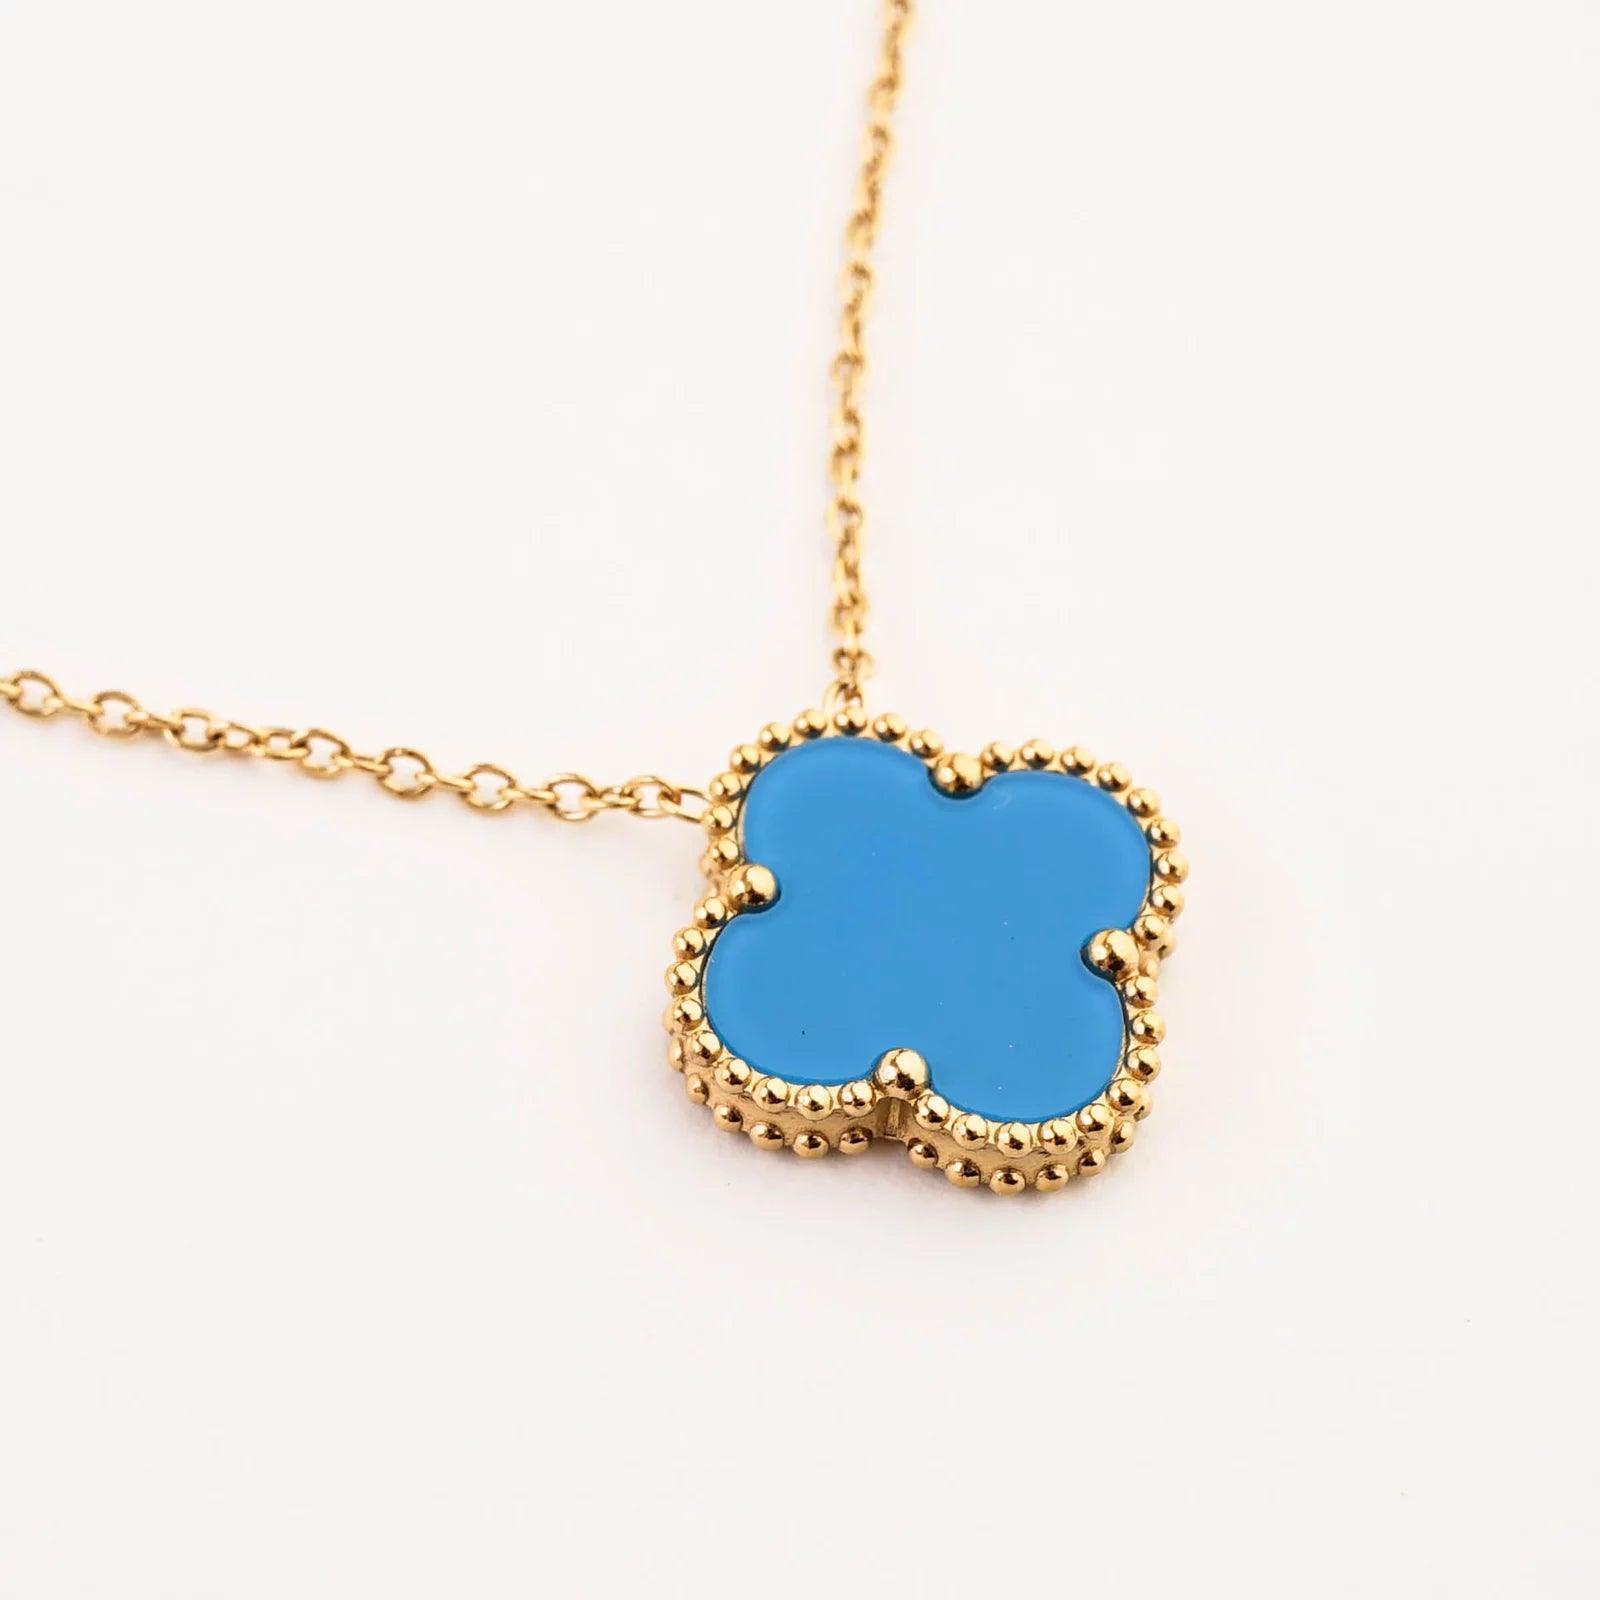 Luxury 4 Leaf Clover Set: Designer Necklace, Bracelet & Stud Earrings For  Women Perfect For Parties, Birthdays & Gifts From Watcha1, $29.31 |  DHgate.Com